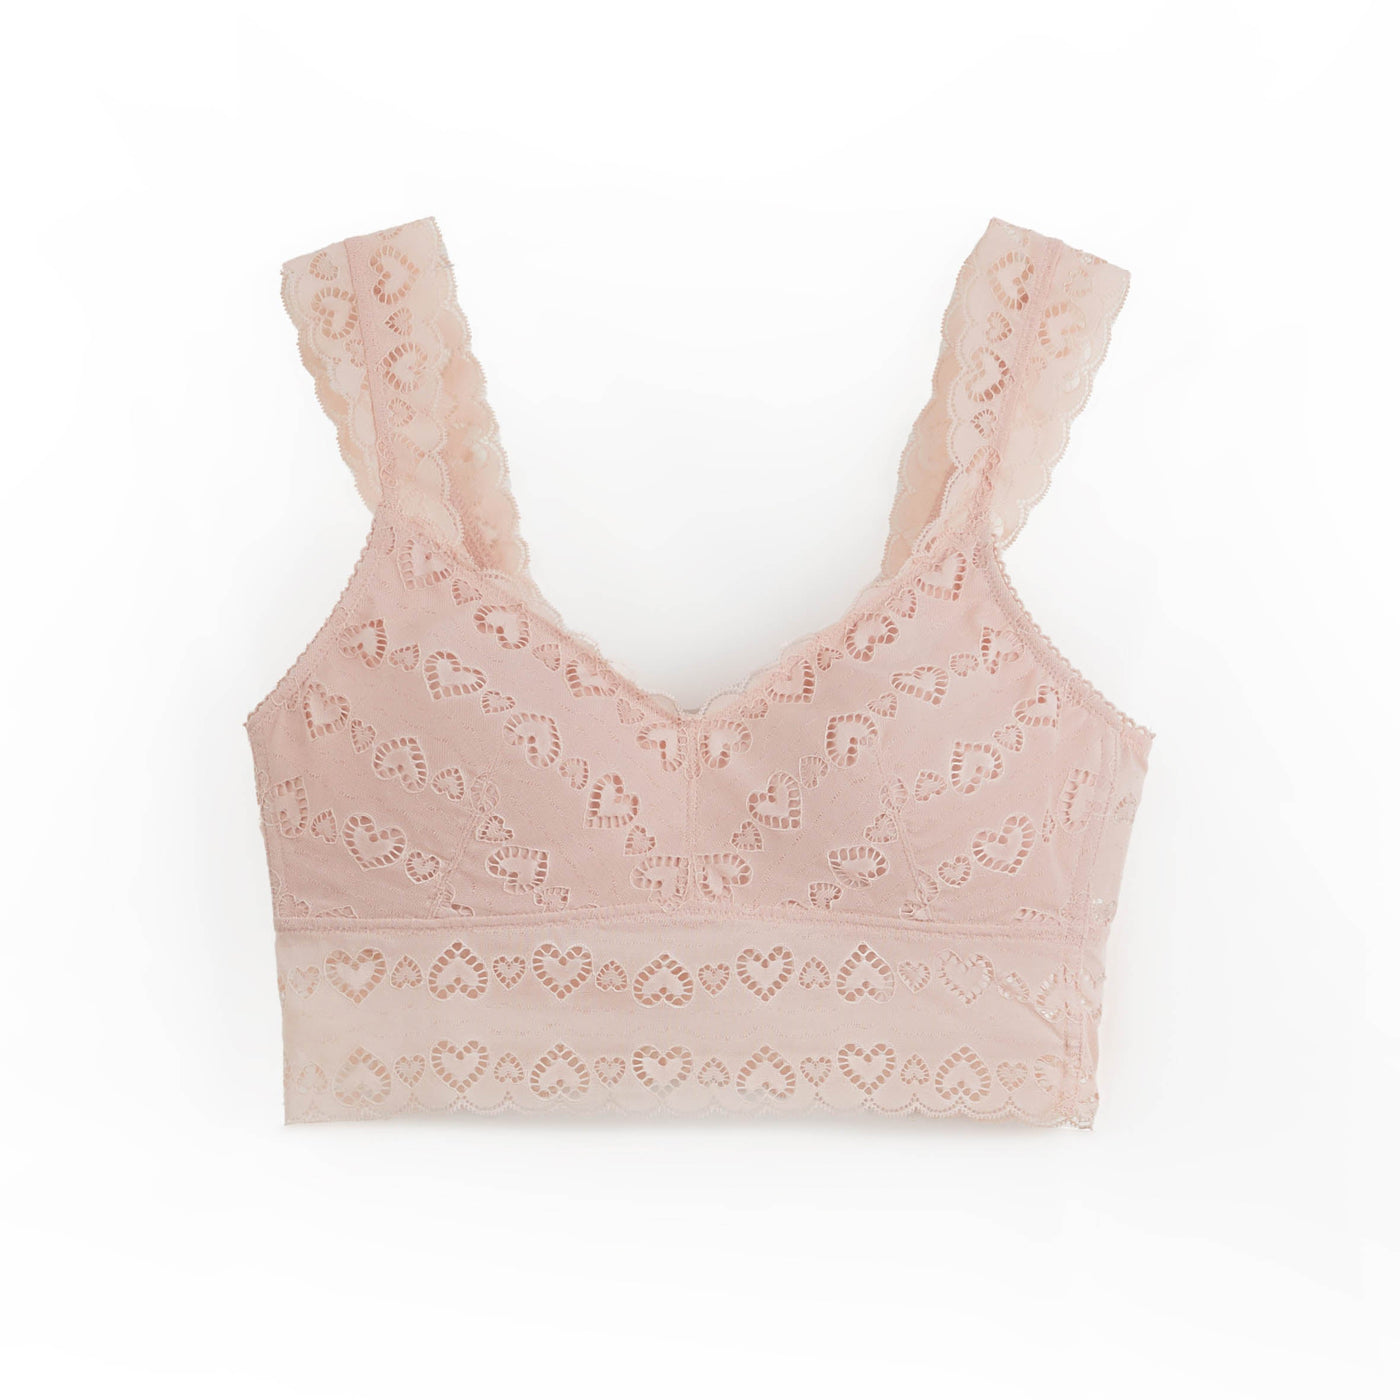 Stylist Extra Skin™ Longline Triangle Lace Bralettle Her Own Words Pink Whip XS 